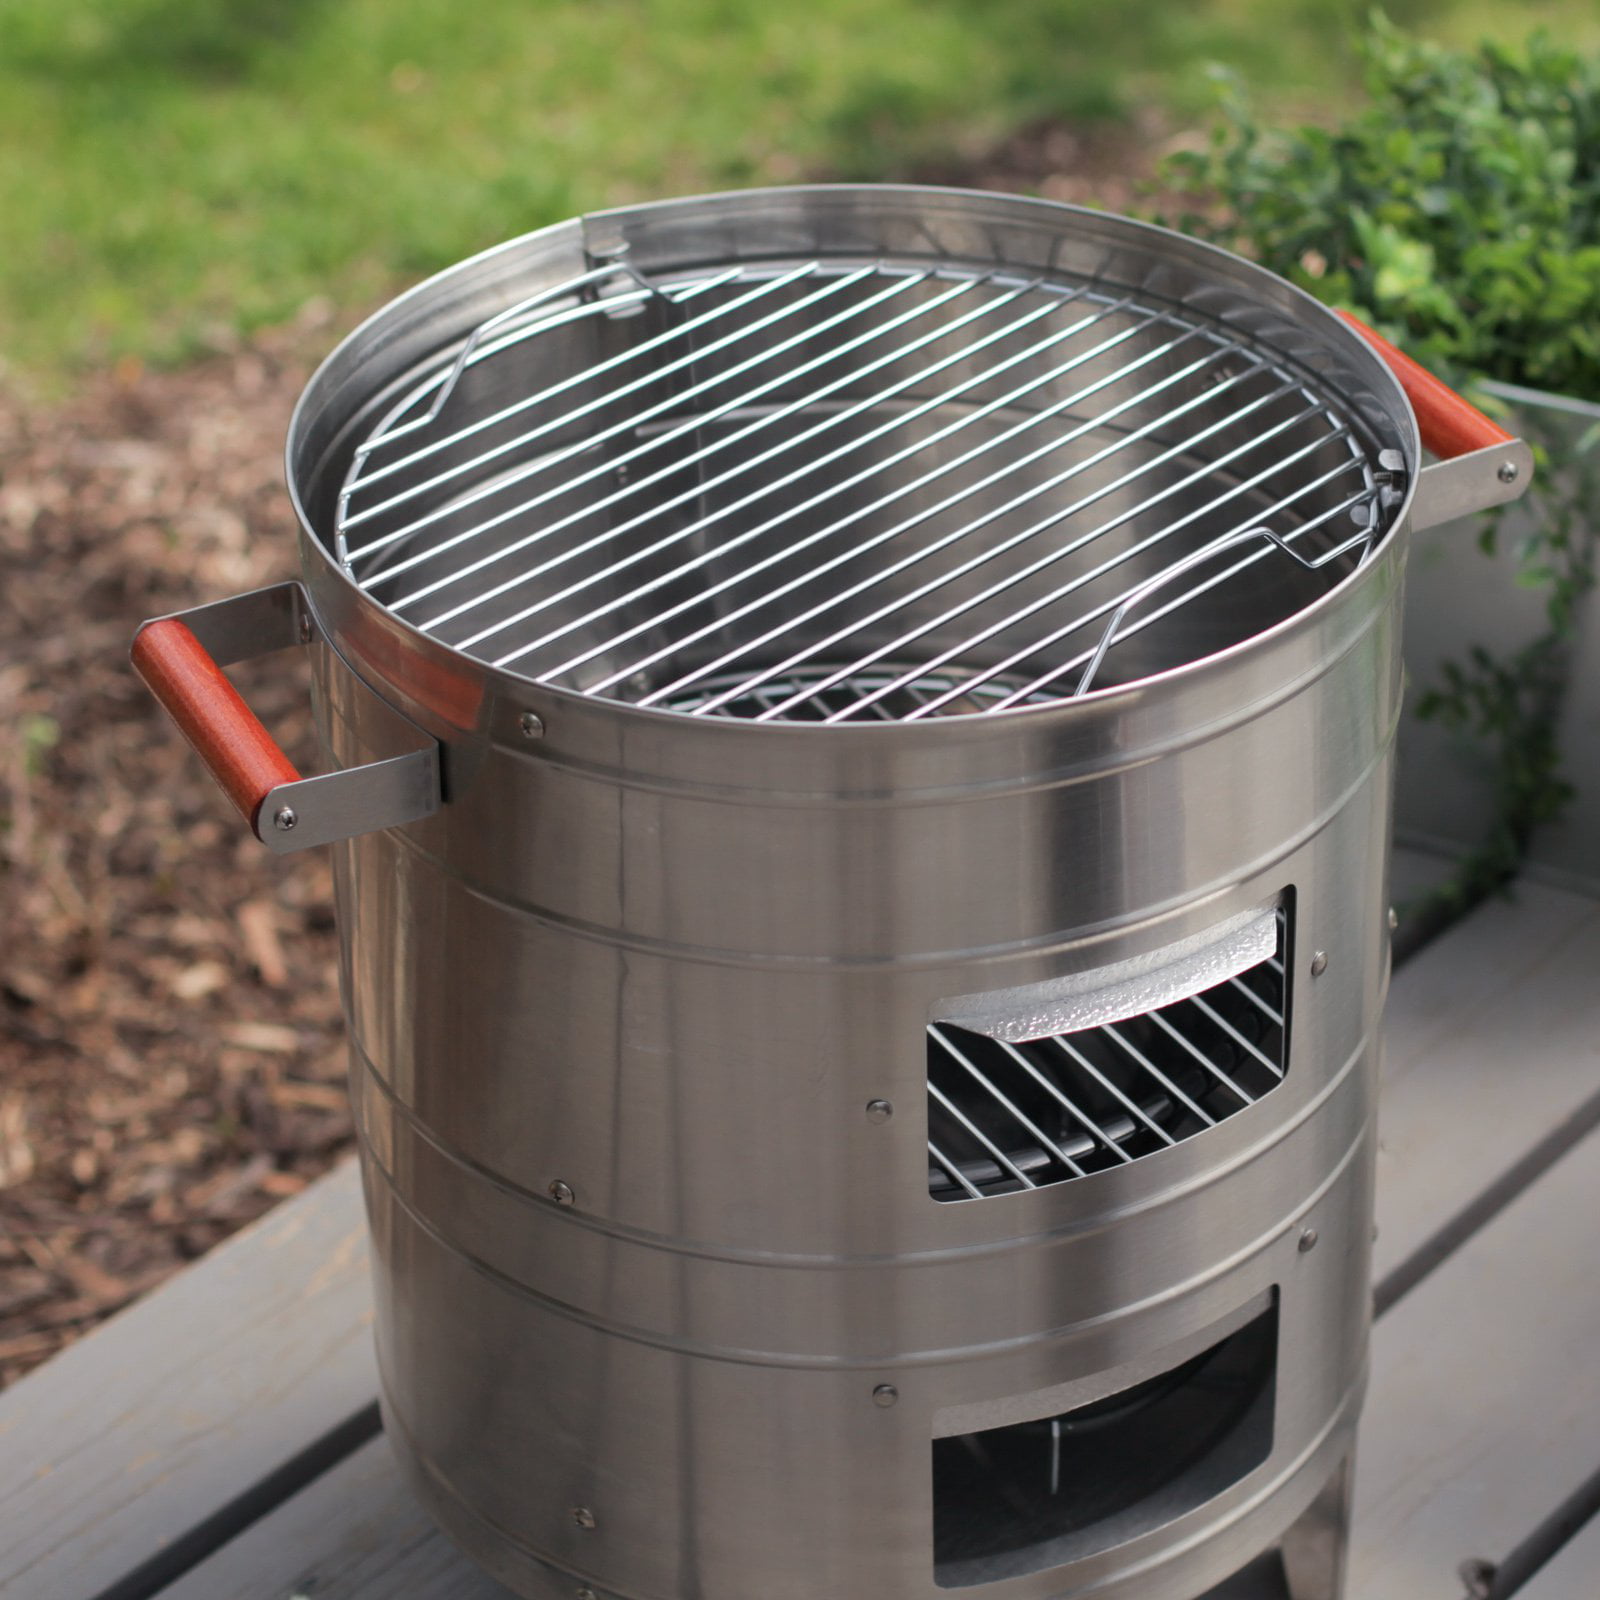 Americana Stainless Steel Electric Water Smoker-Model 5029P2.911